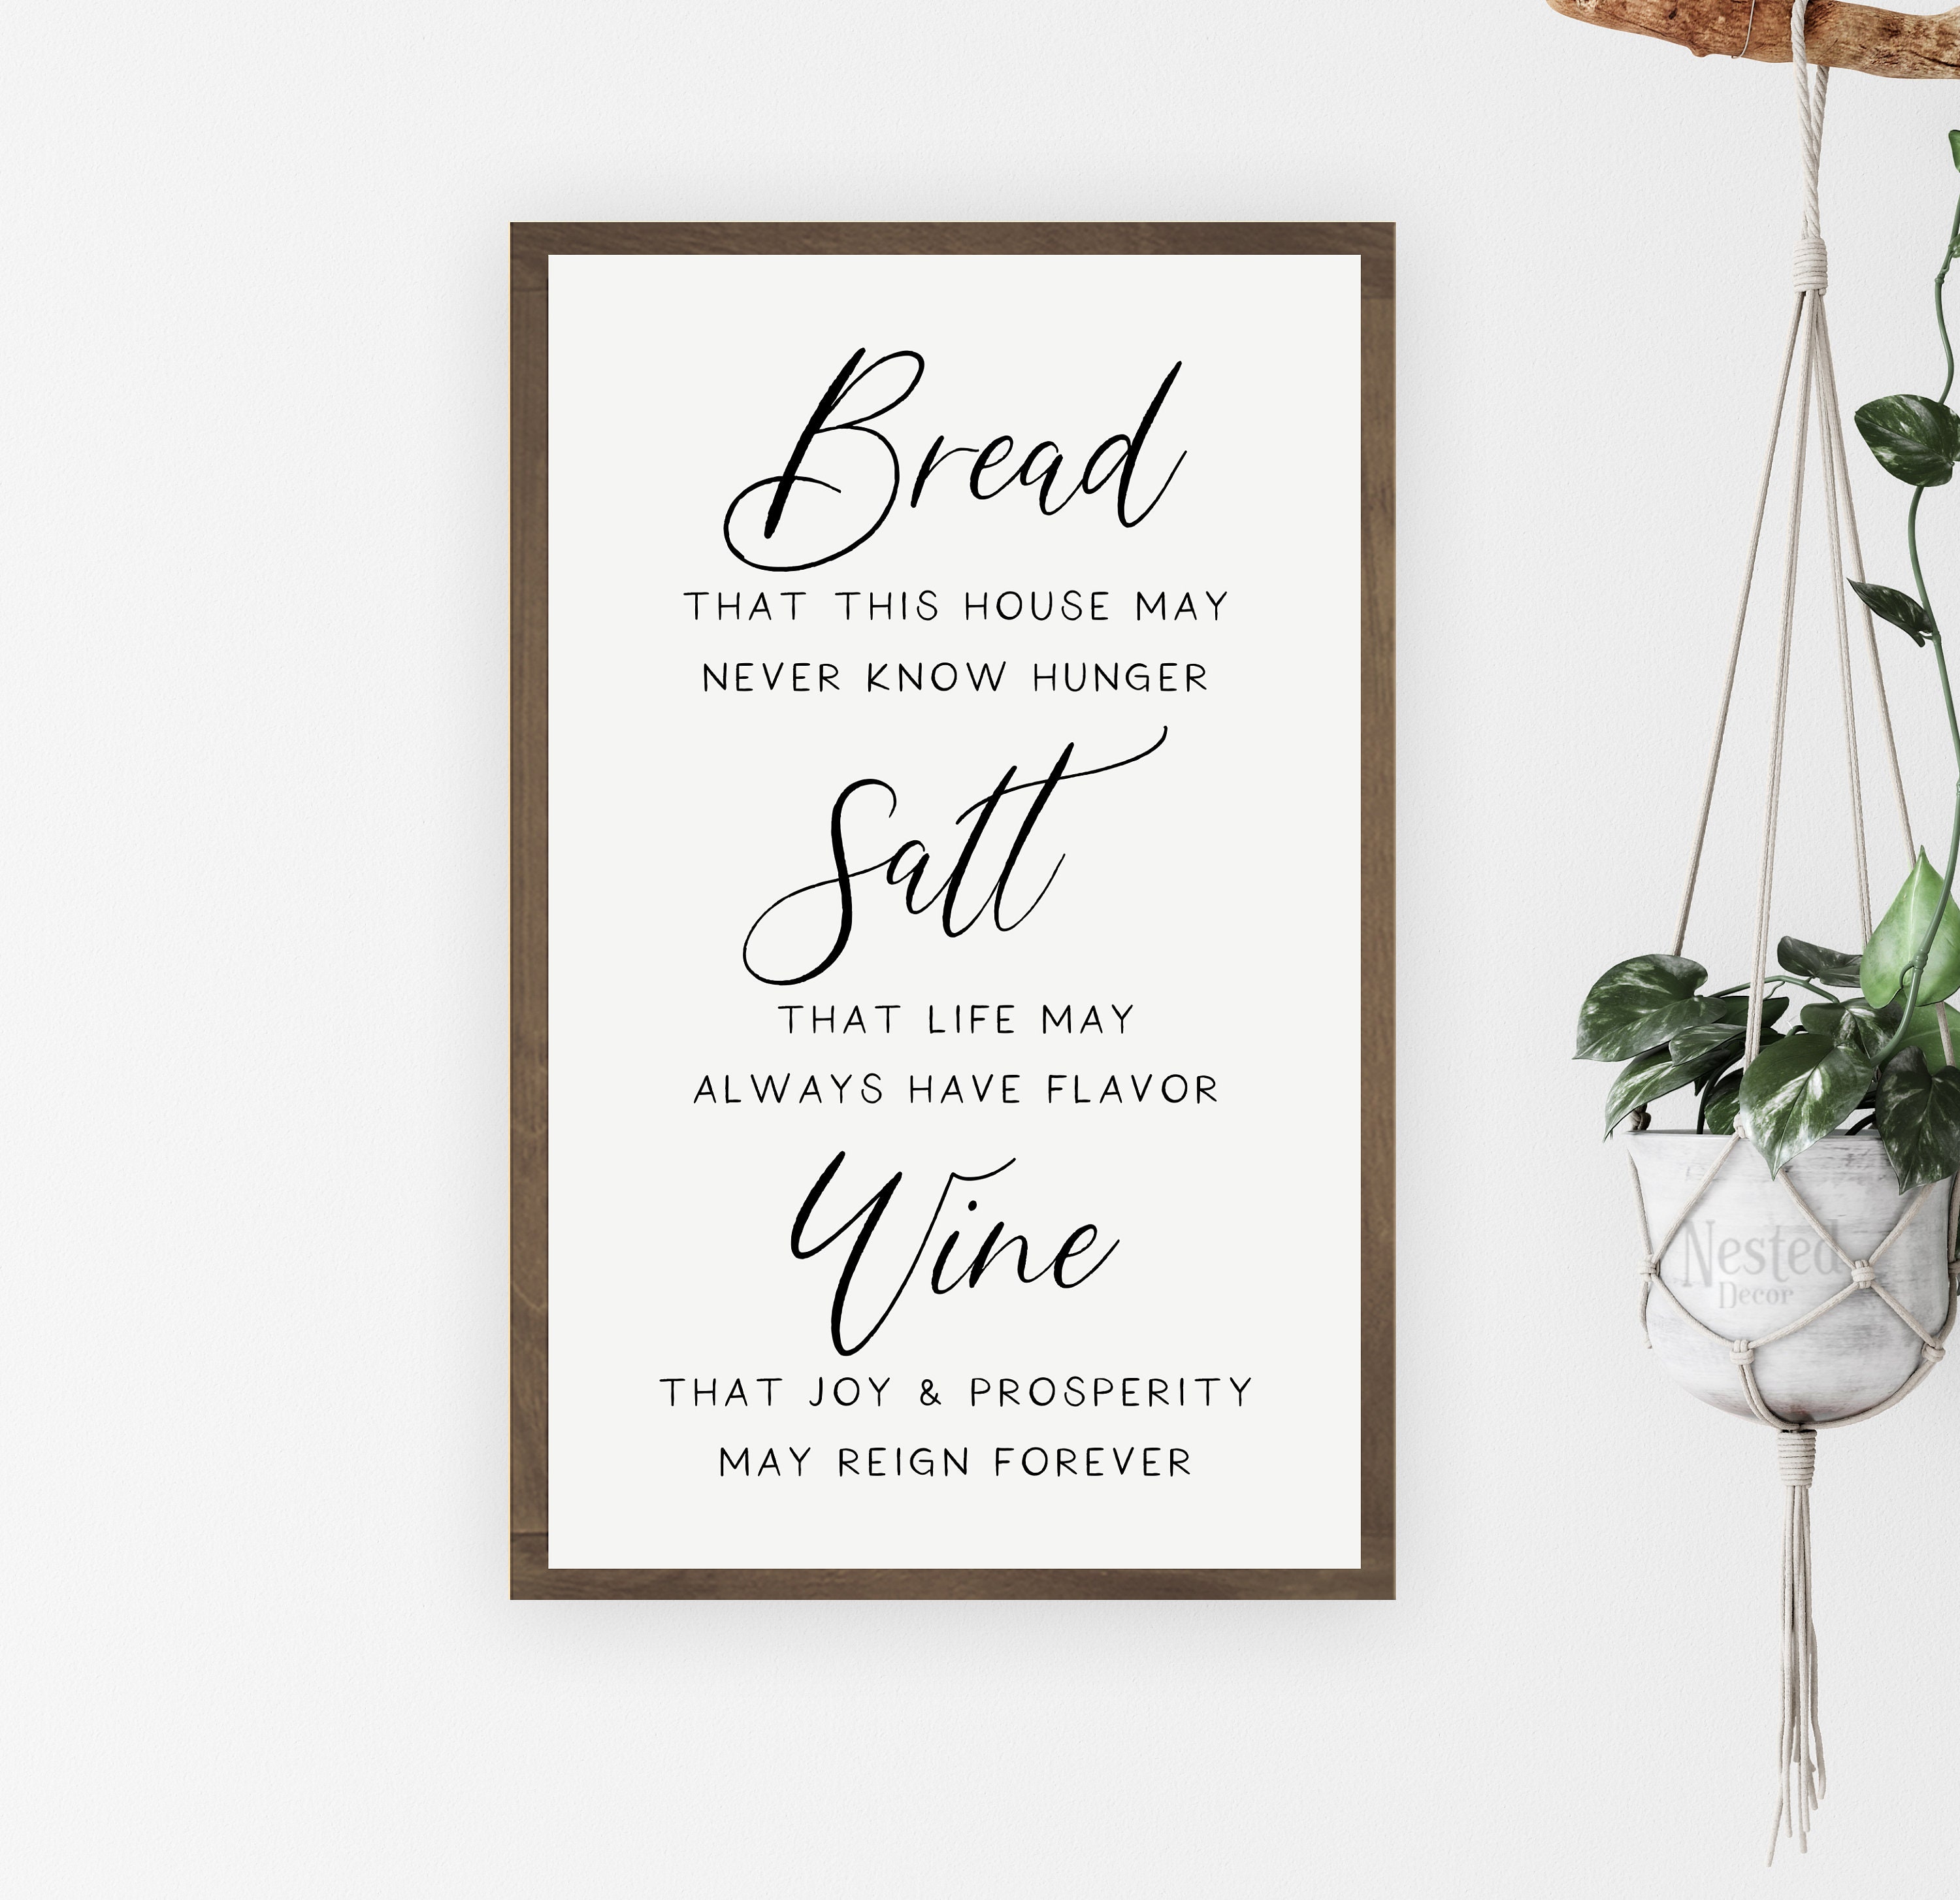 bread-salt-wine-sign-it-s-a-wonderful-life-quote-home-etsy